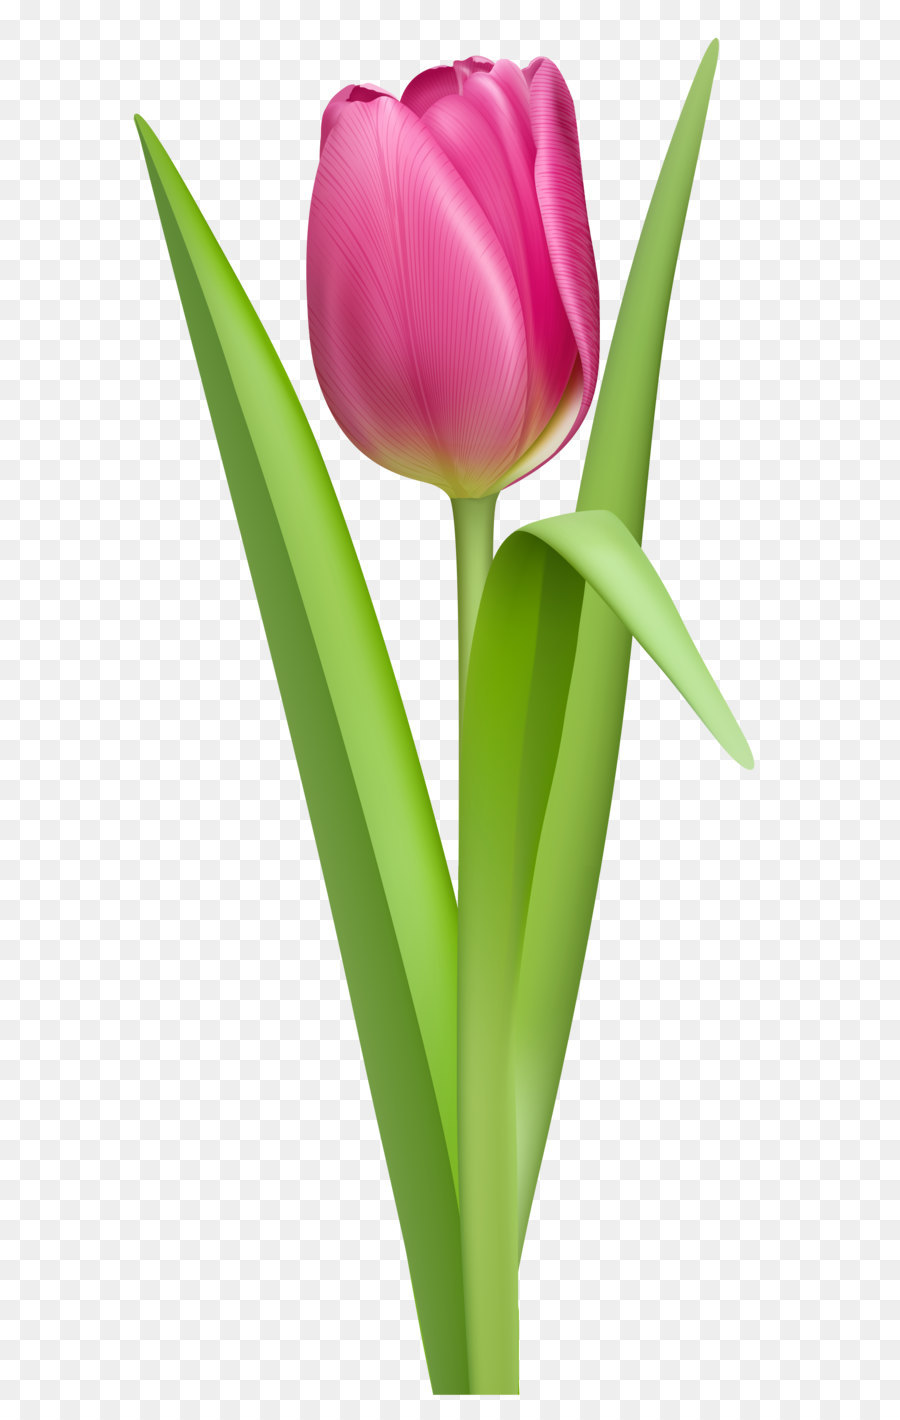 The Tulip: The Story of a Flower That Has Made Men Mad Computer file - Transparent Pink Tulip PNG Clipart Picture png download - 1851*4000 - Free Transparent Tulip png Download.